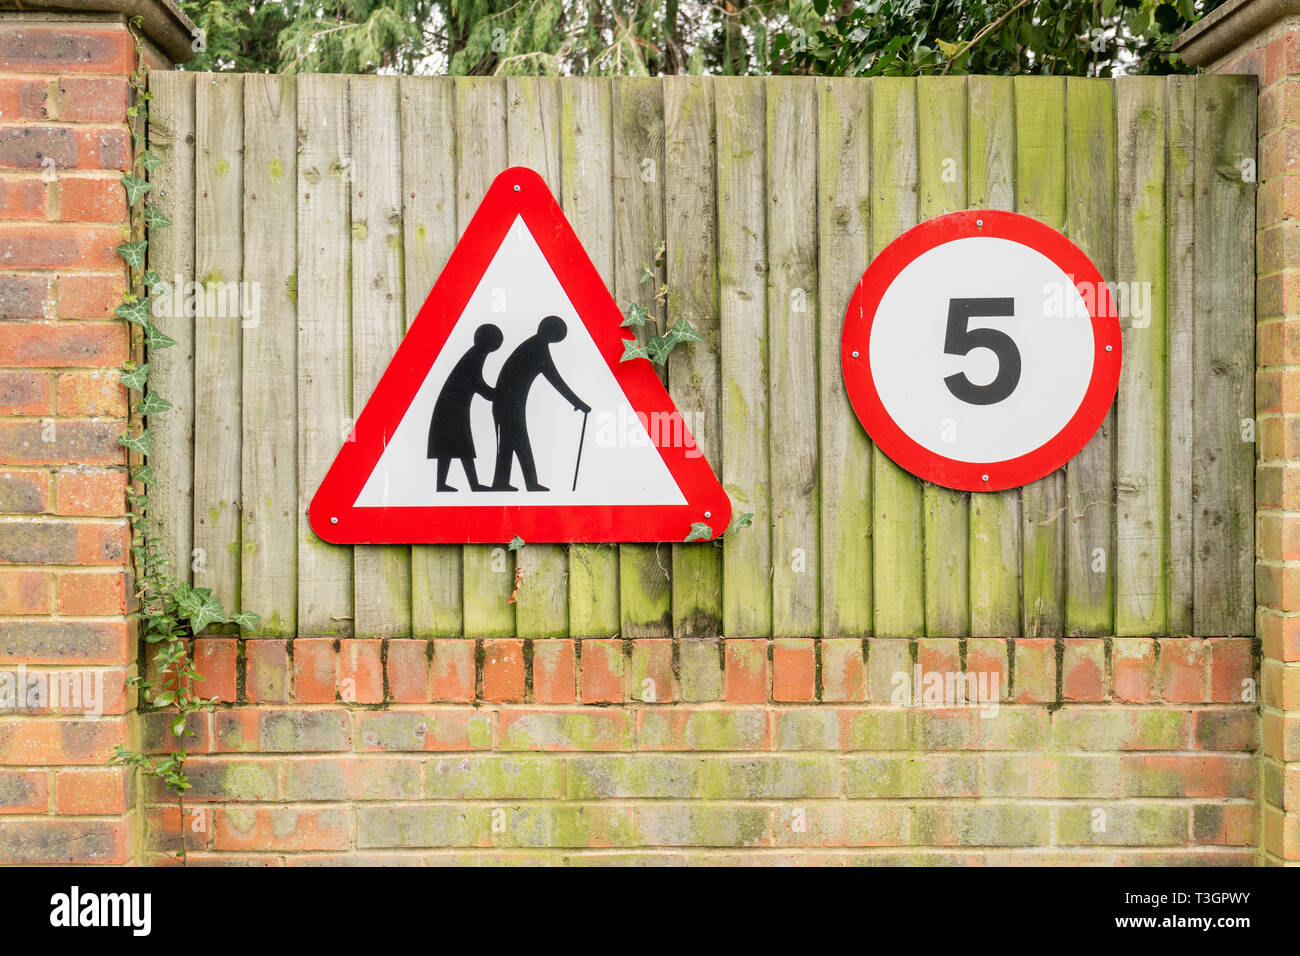 Elderly people and 5mph road traffic signs, England, UK Stock Photo